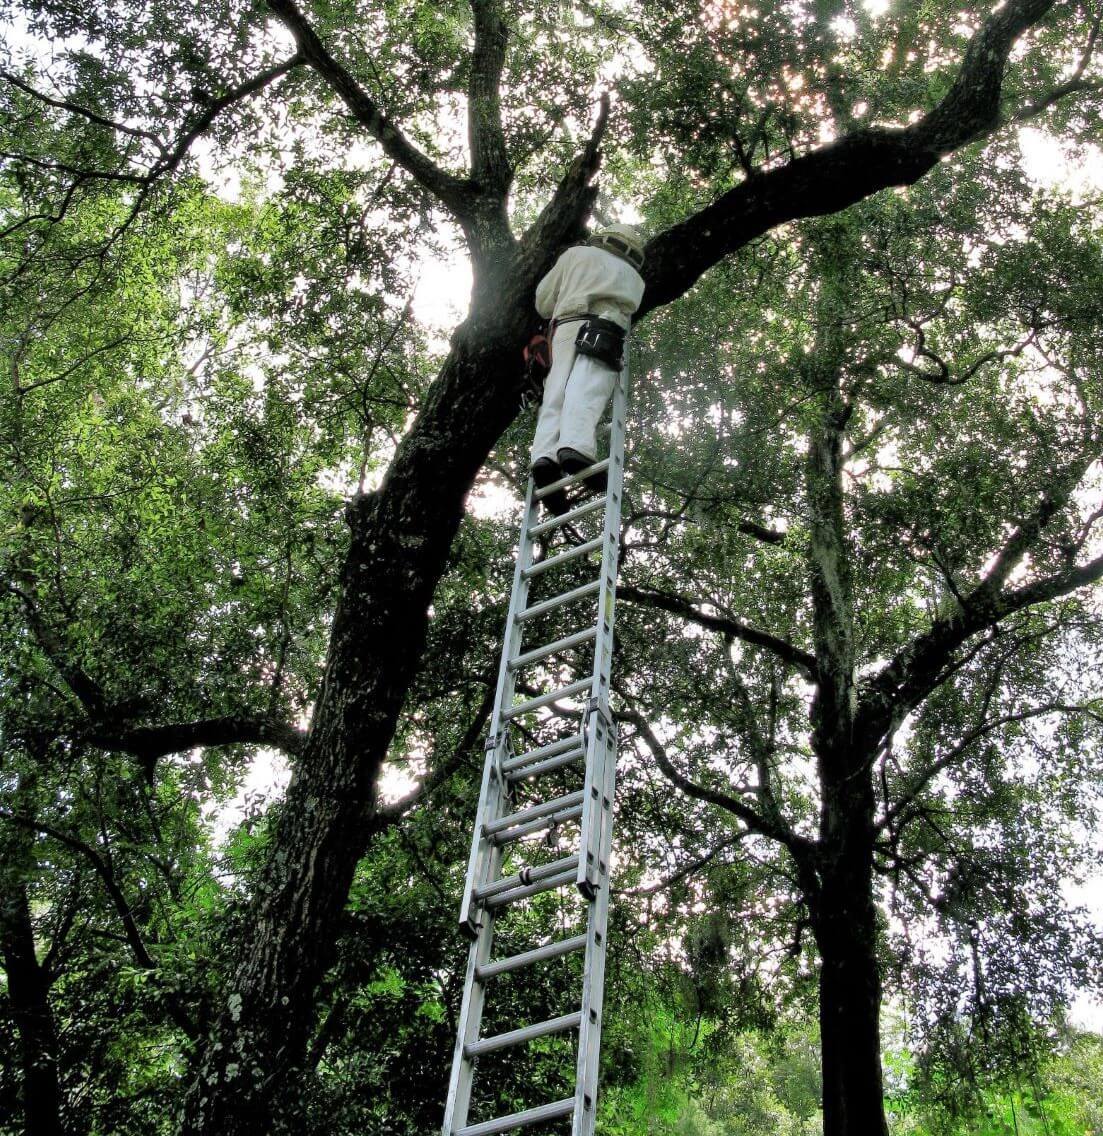 Beekeeper removing a swarm from a tree